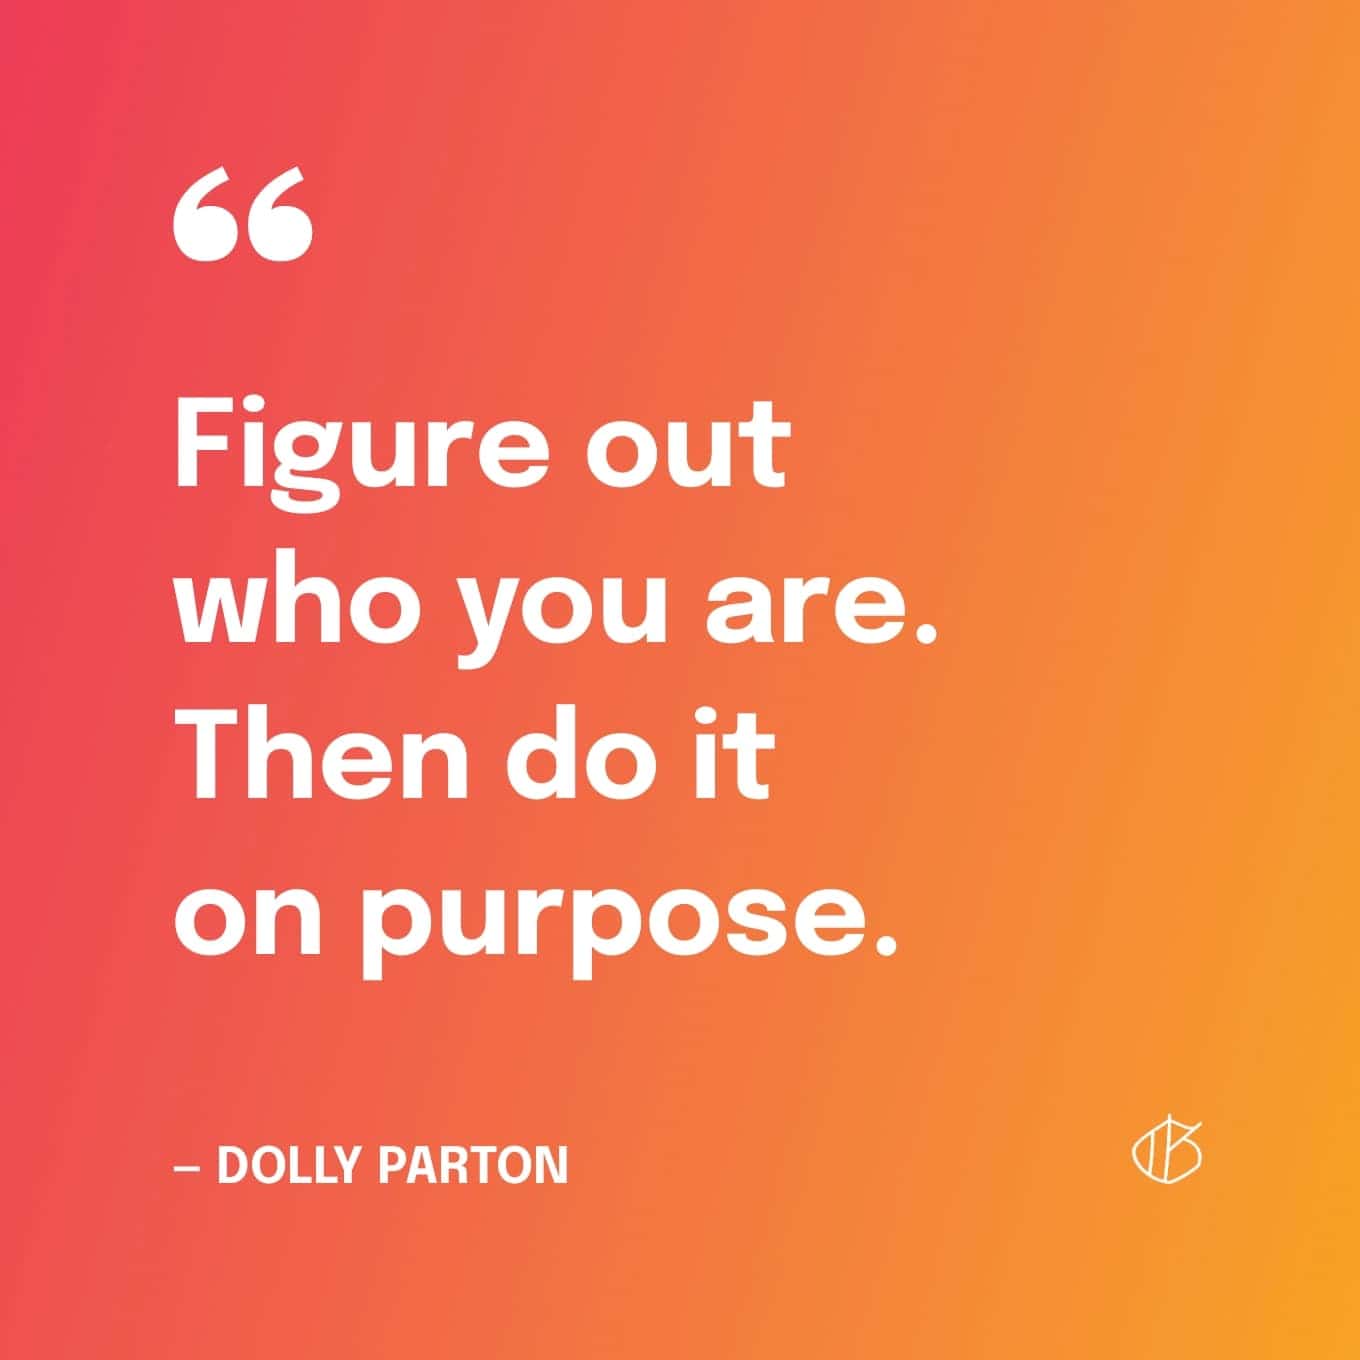 Dolly Parton Quote Wallpaper: Figure out who you are. Then do it on purpose.